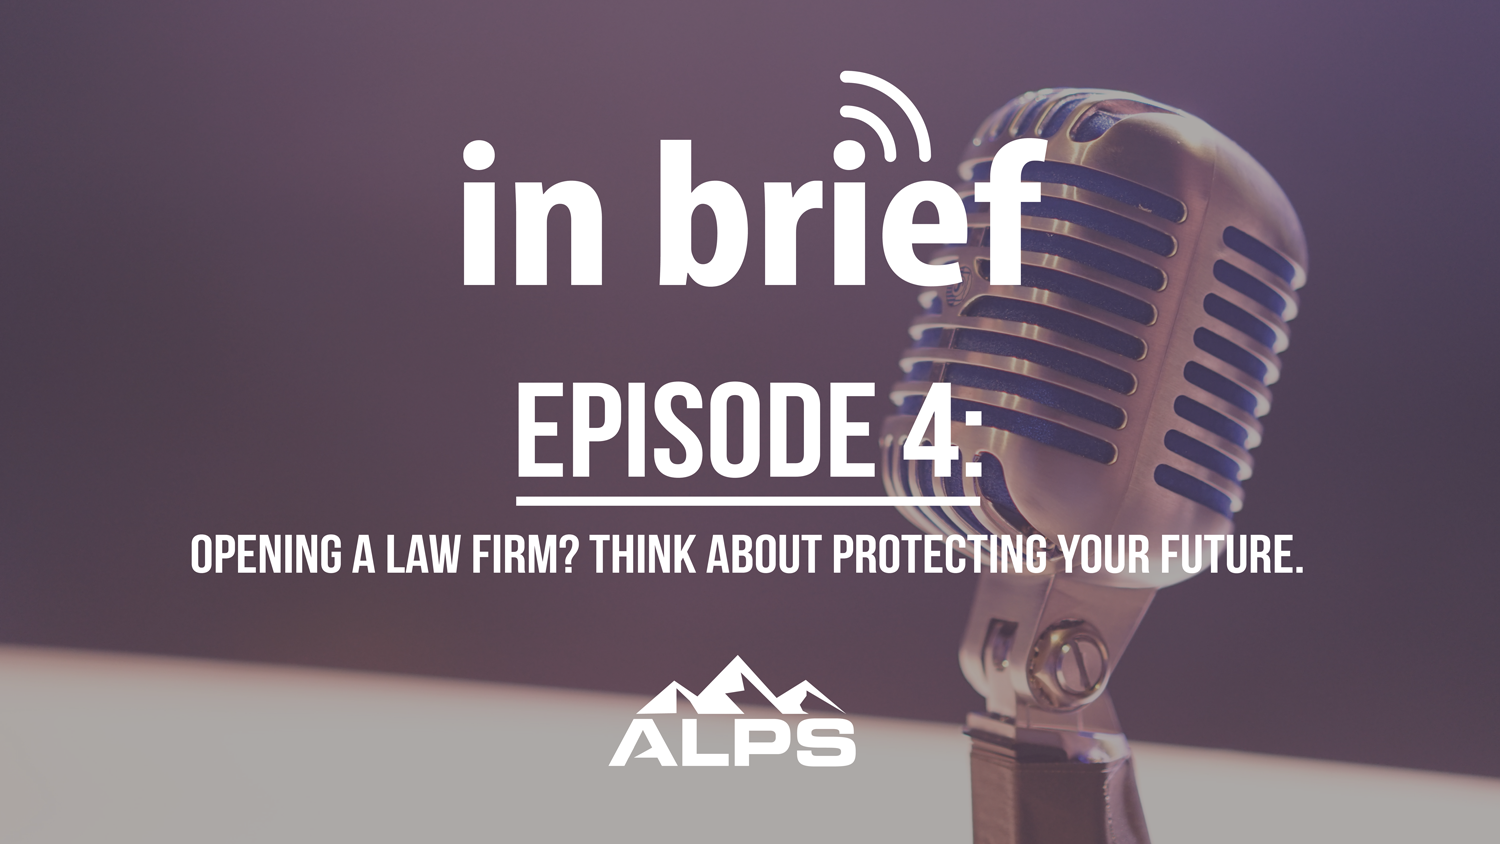 ALPS In Brief Podcast-Episode 4: Opening a Law Firm? Think About Protecting Your Future.